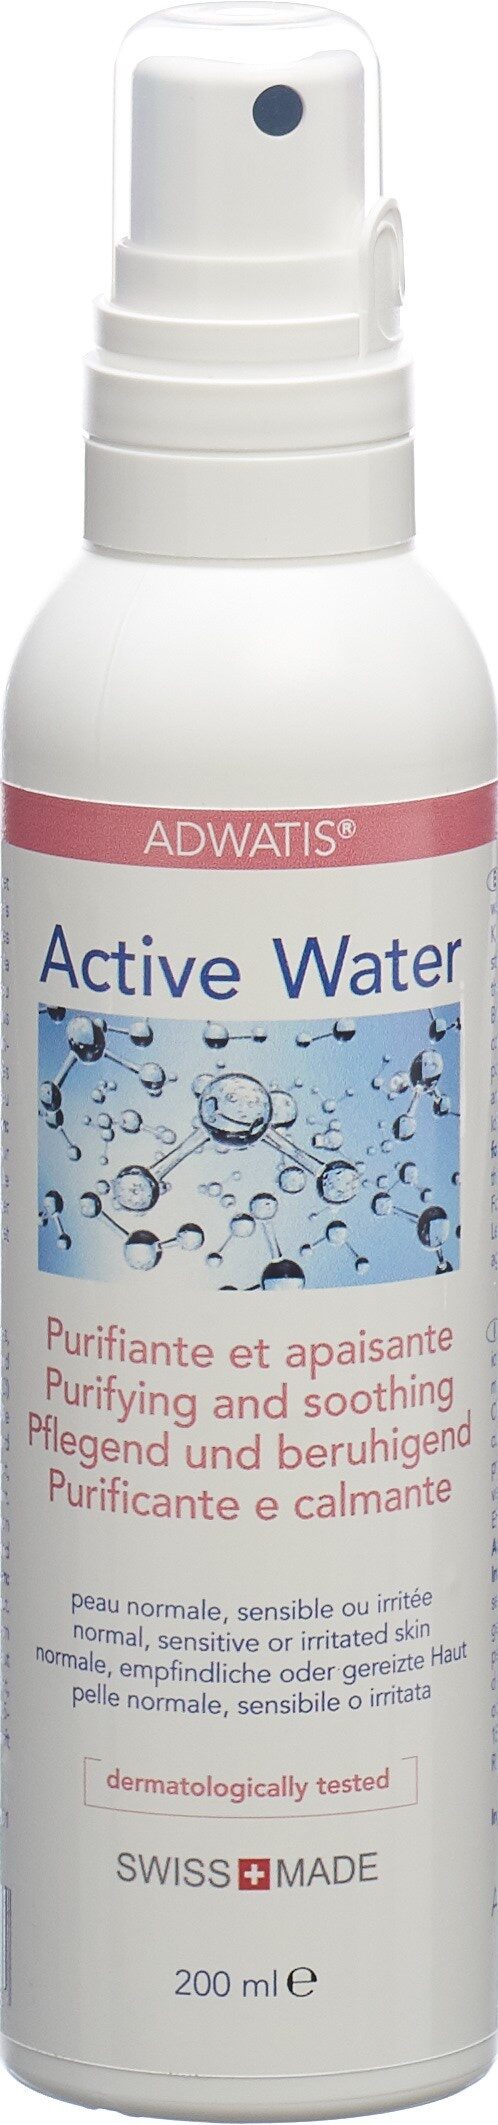 Active Water - Product - fr